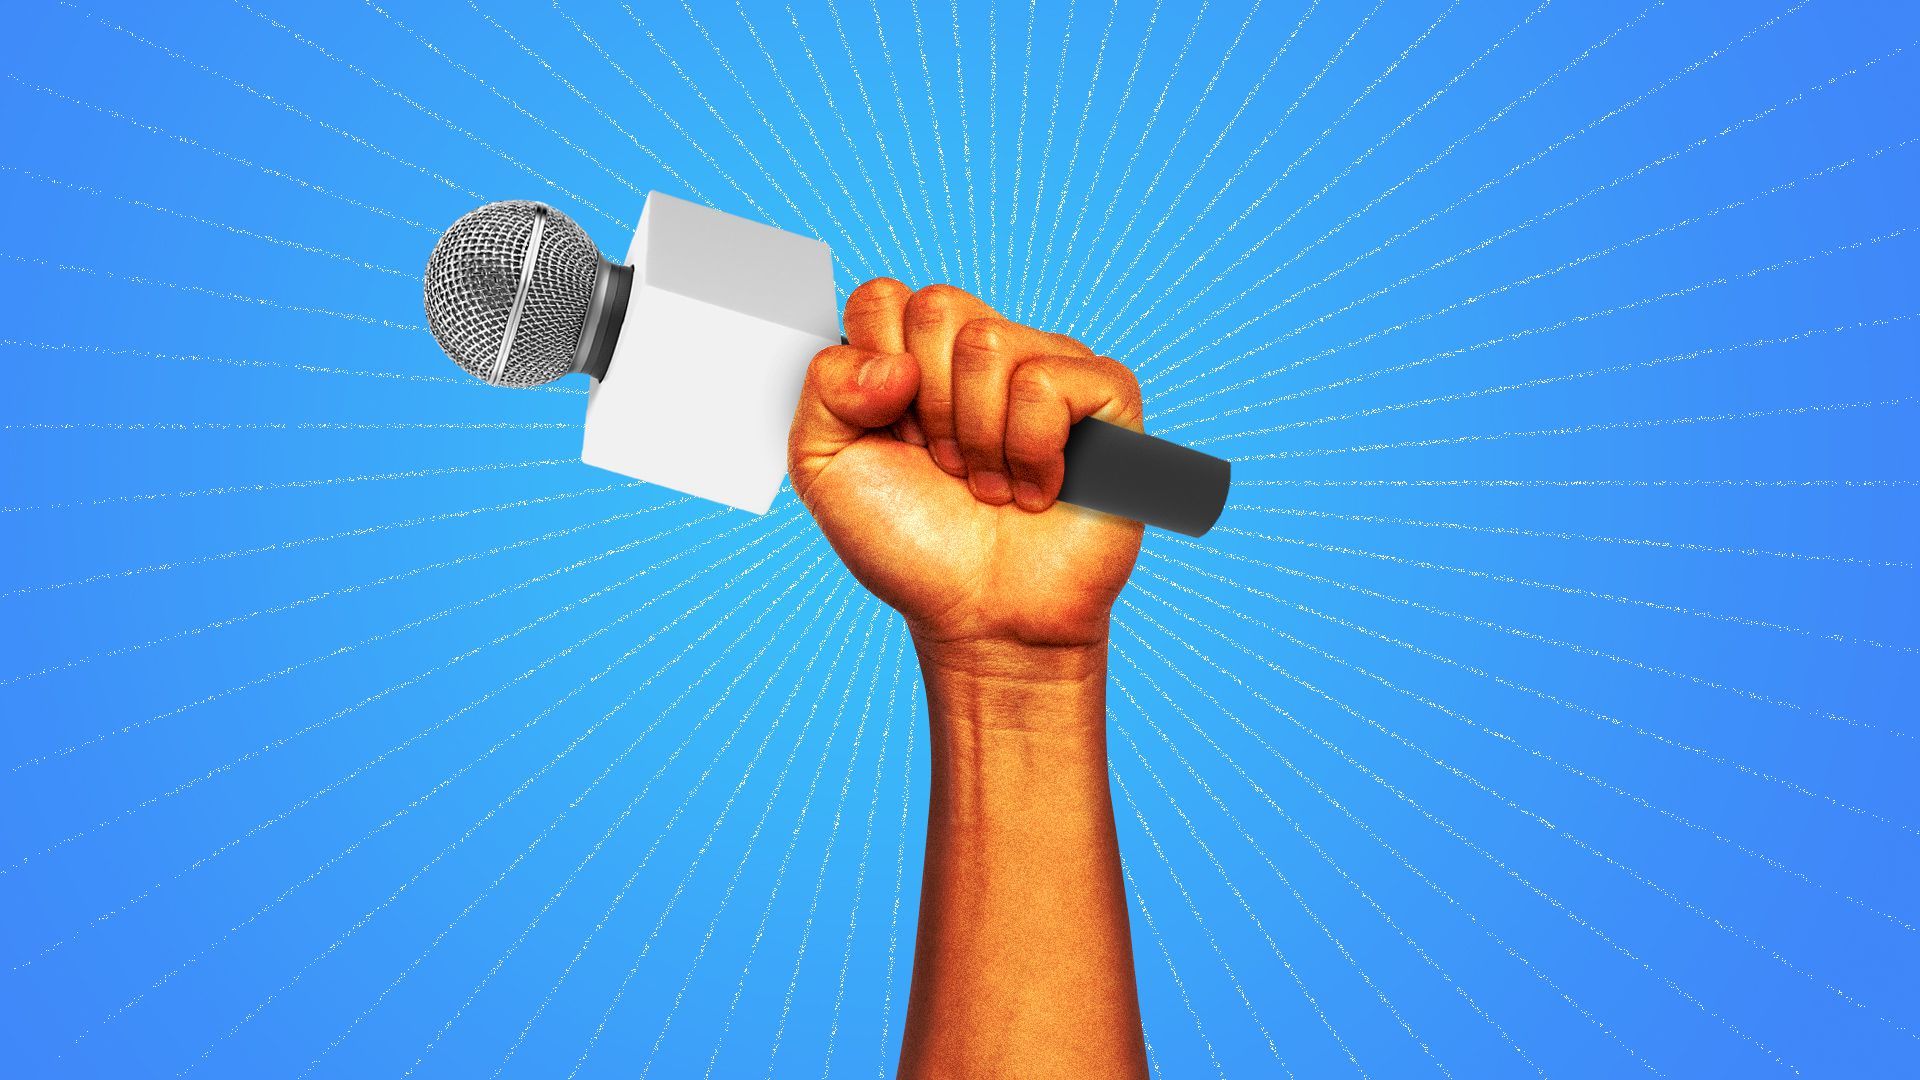 Illustration of a fist holding a news microphone. 